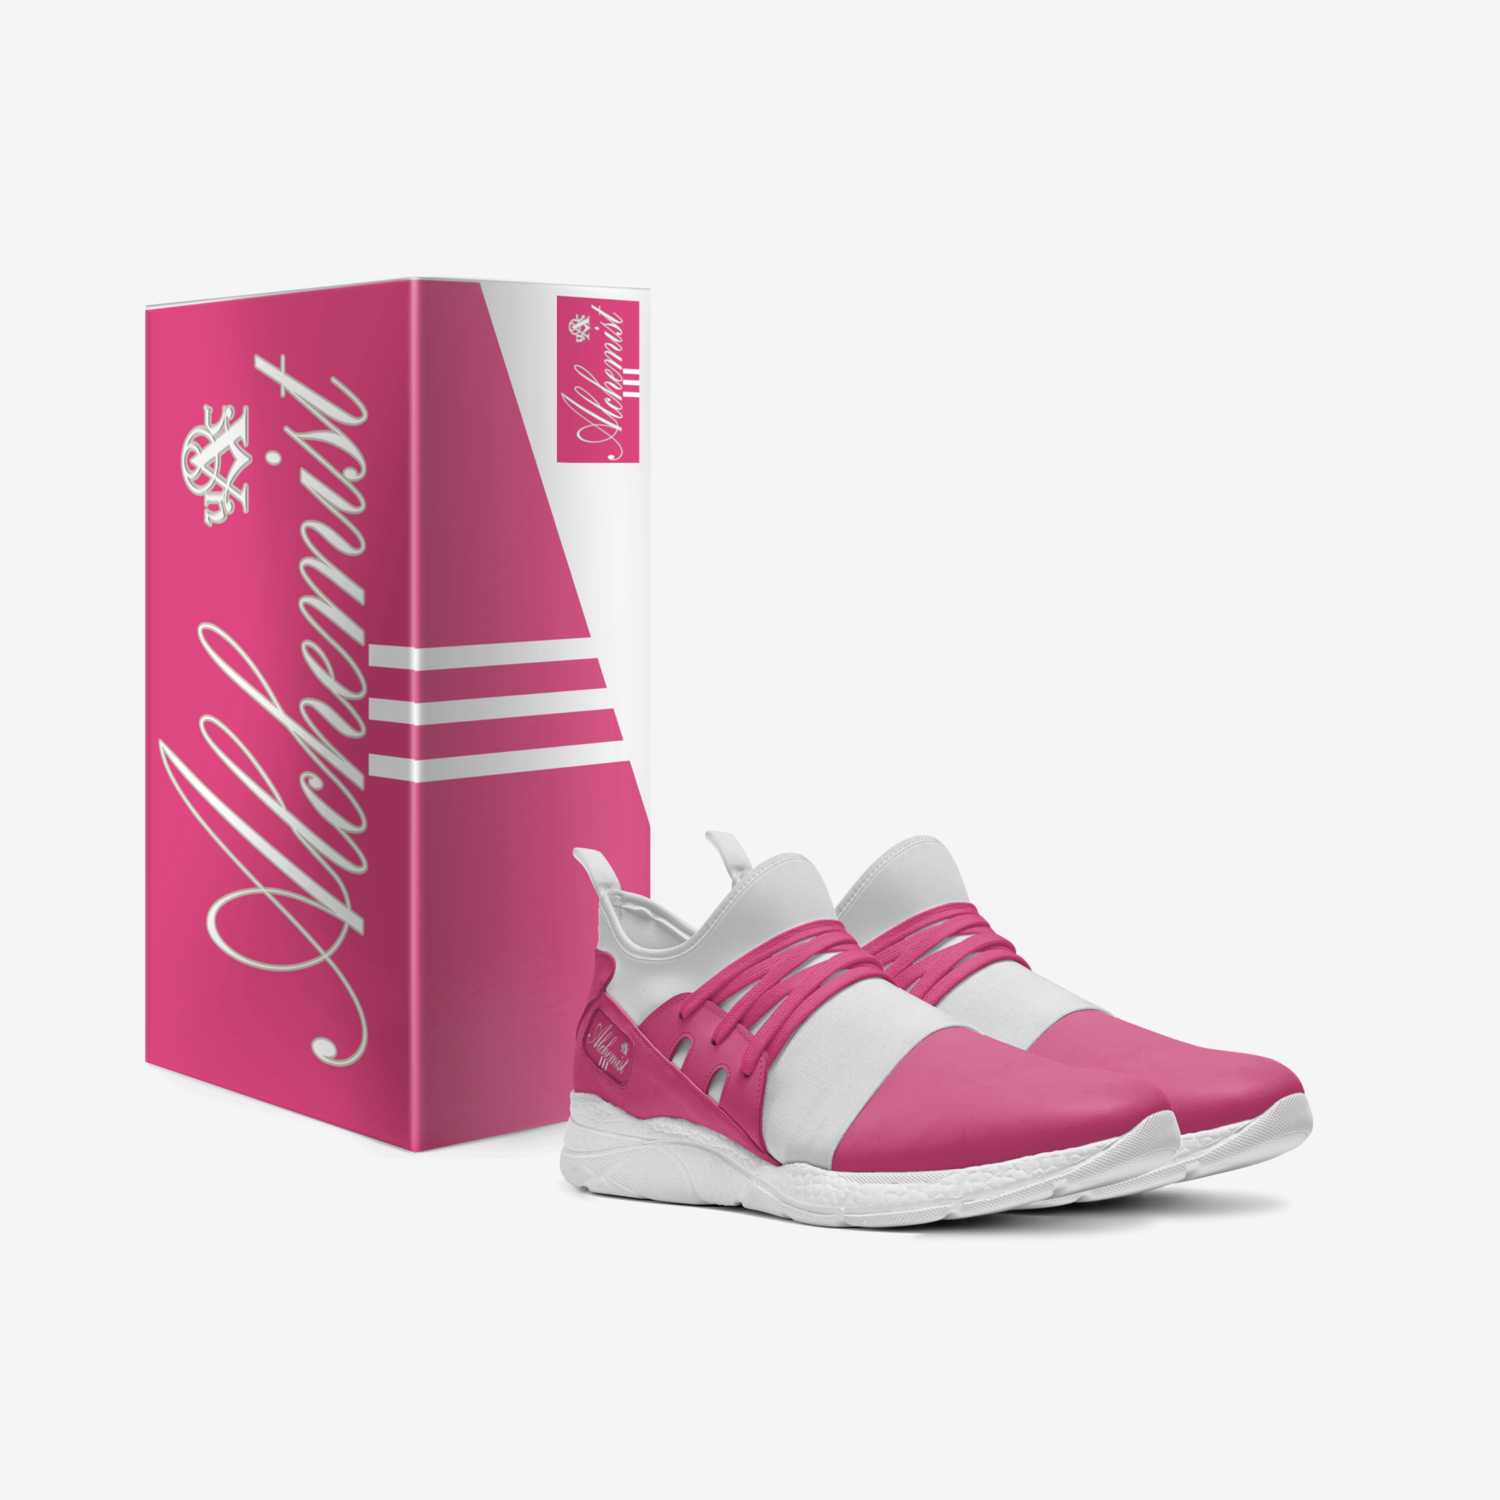 Pink Print 4 custom made in Italy shoes by Urban Alchemist Clothing | Box view